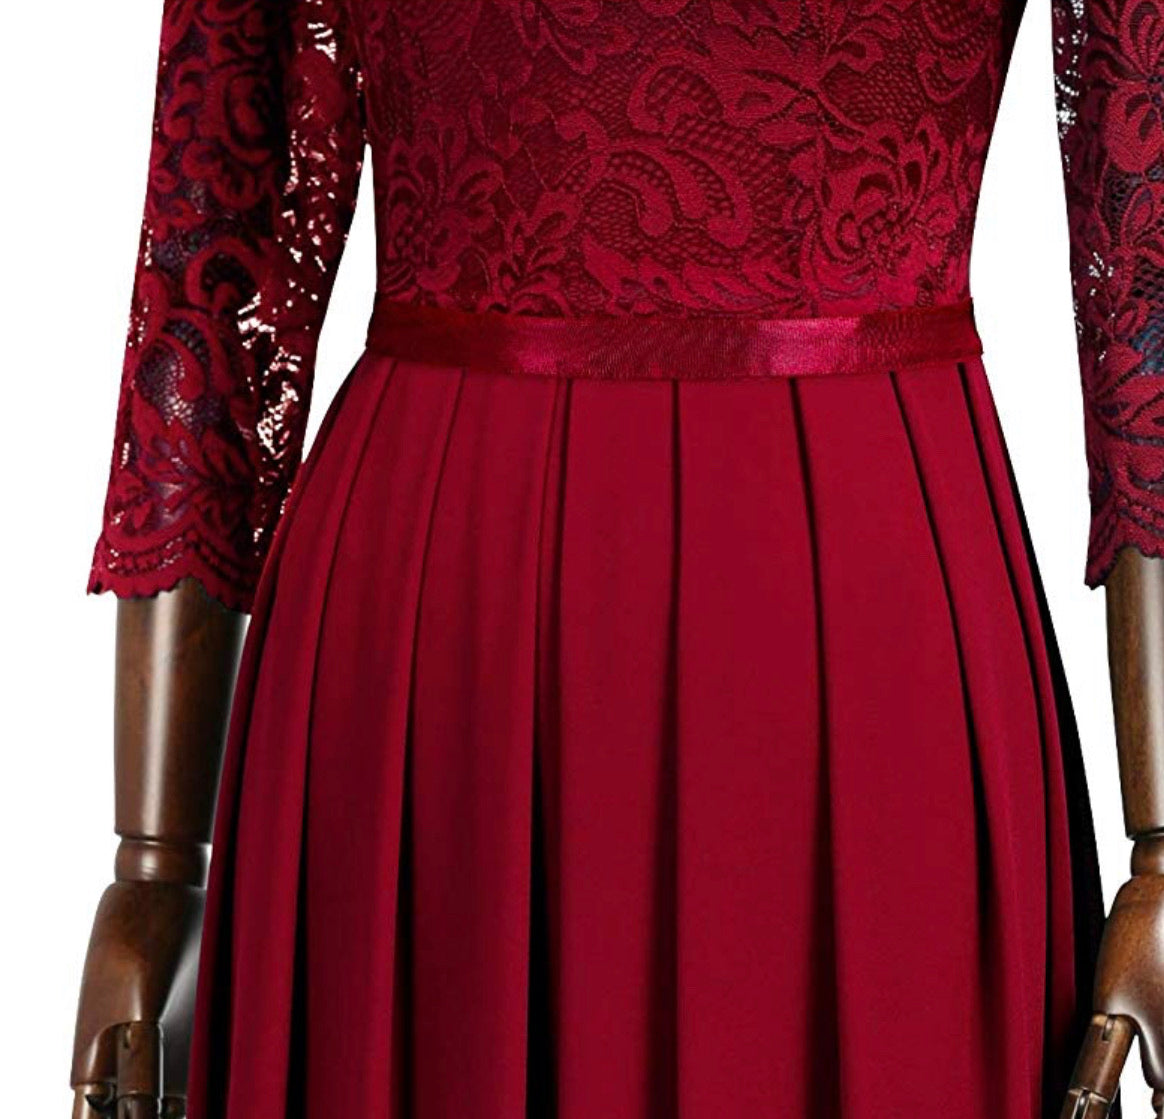 Long Red Lace Patterned Dress, Sizes Small - 2XLarge (US Sizes 4 - 18)